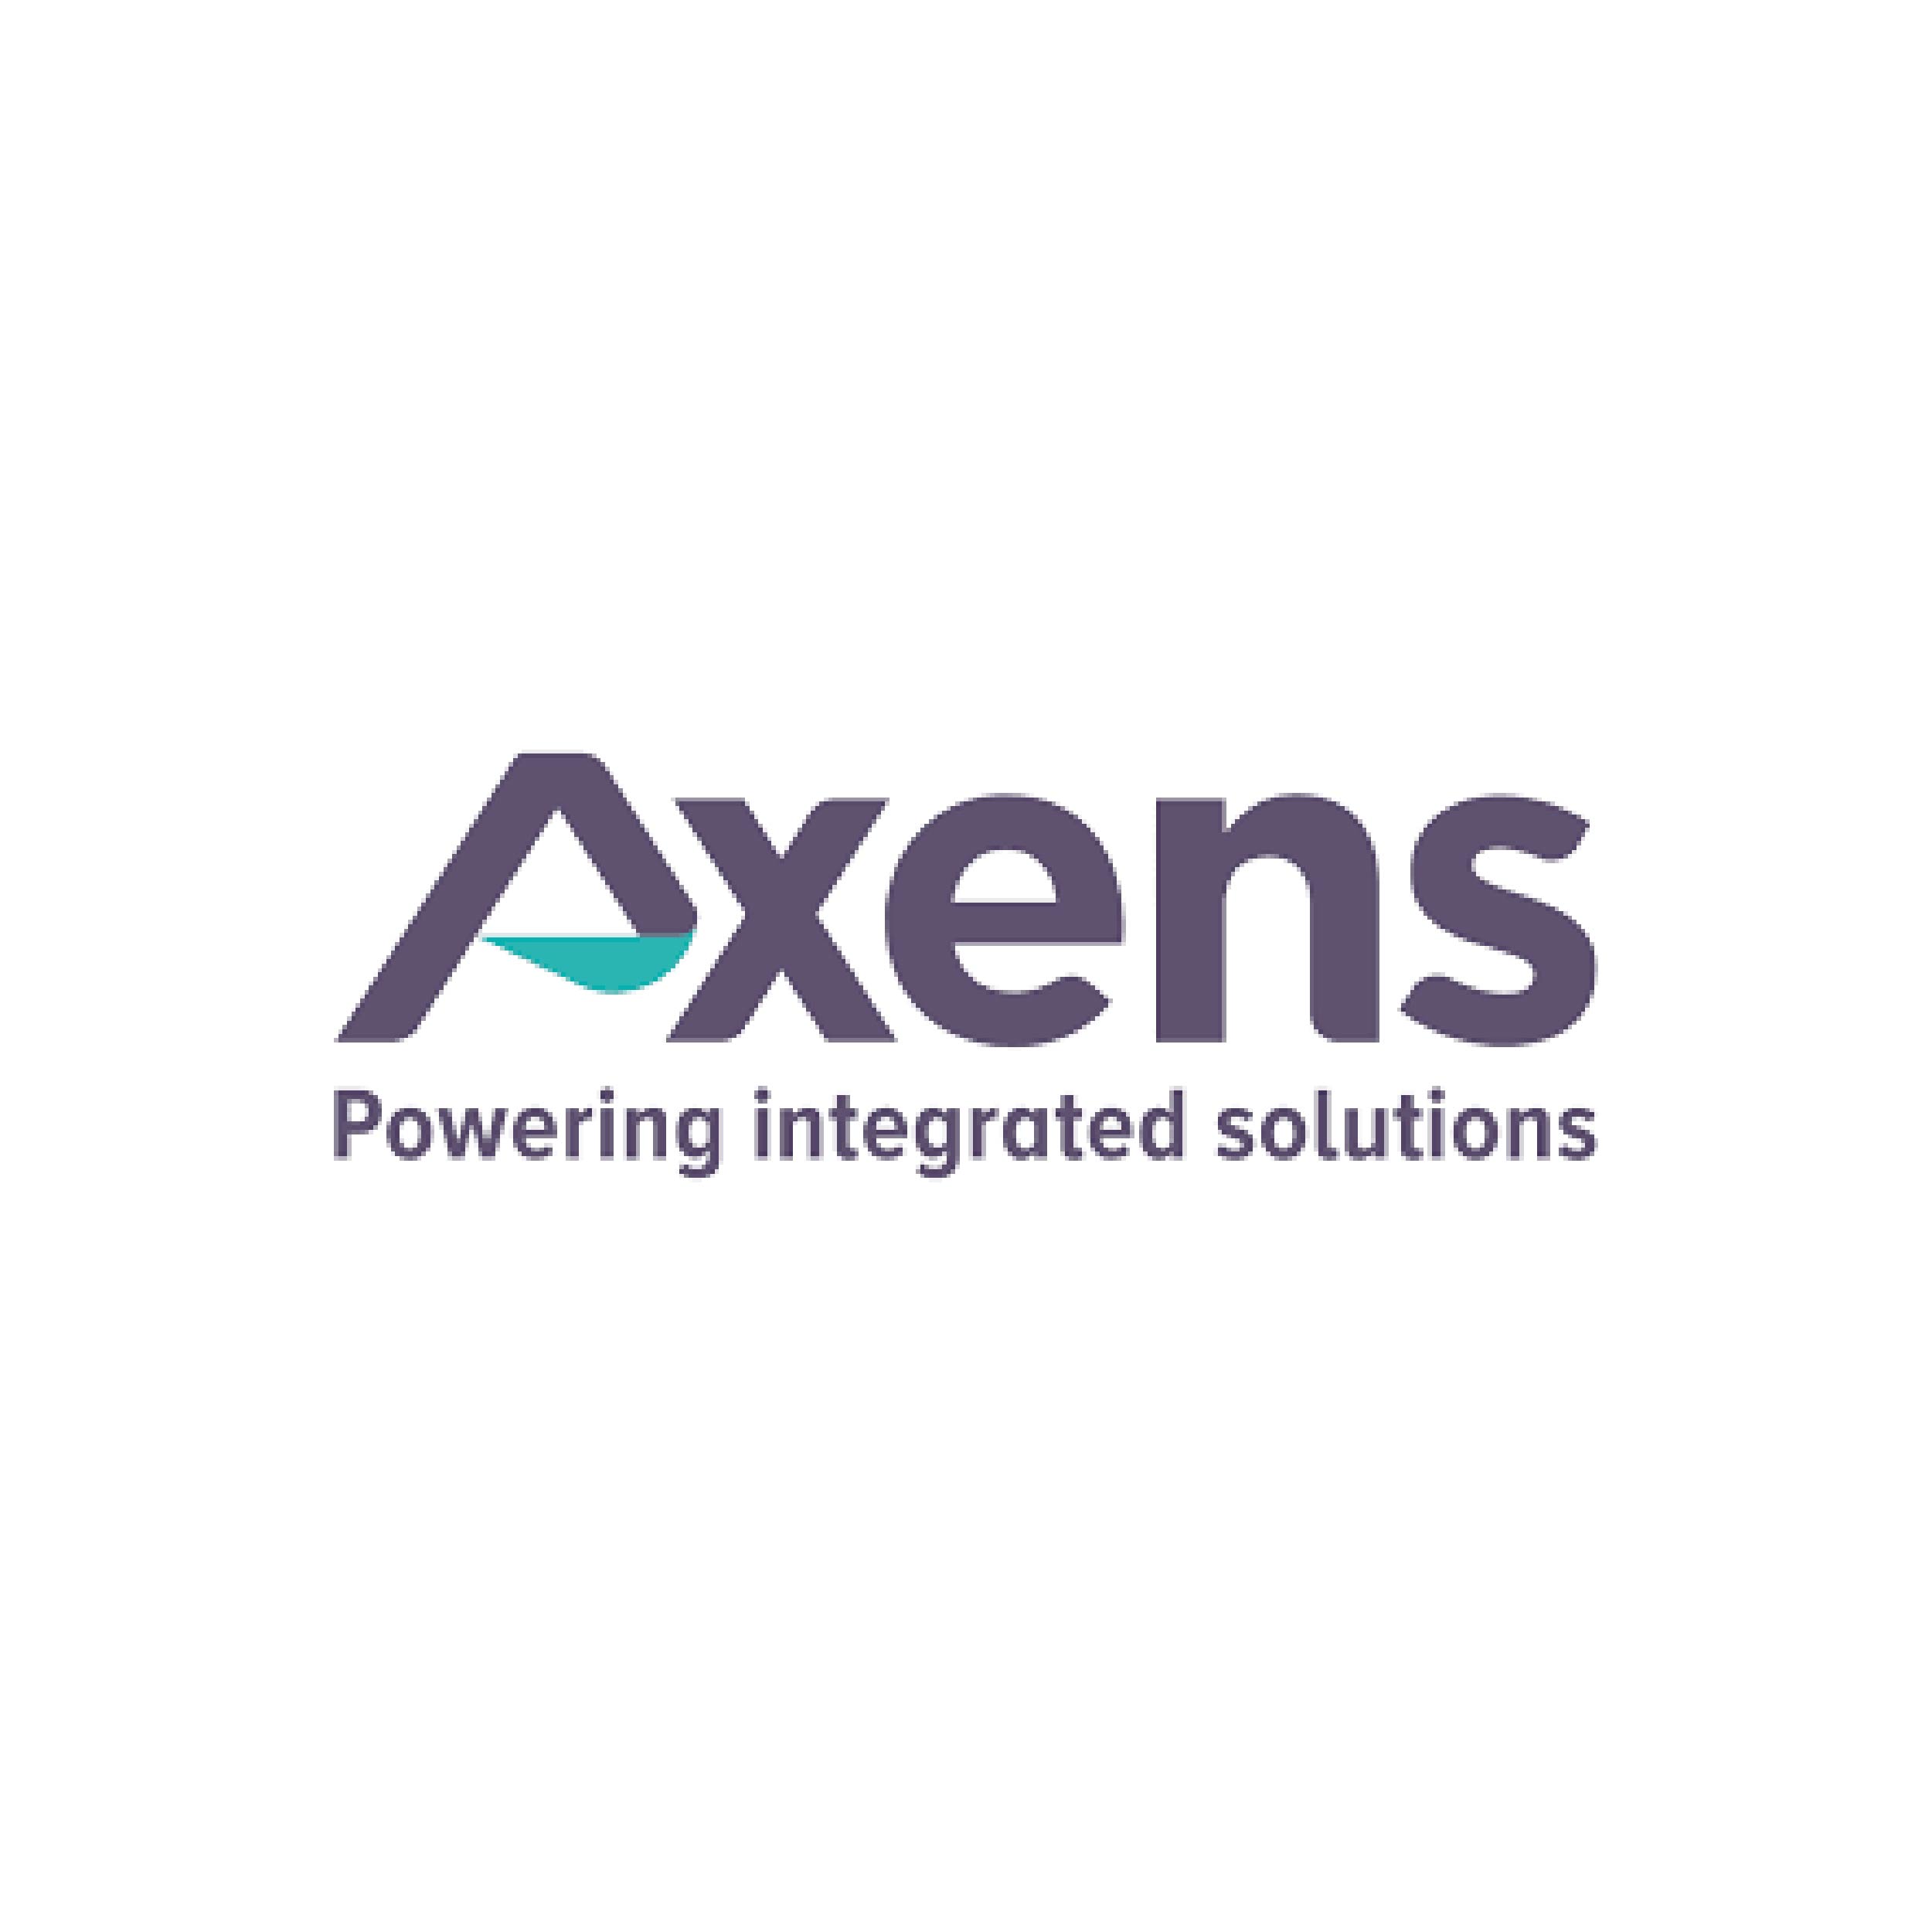 Axens IFP Group